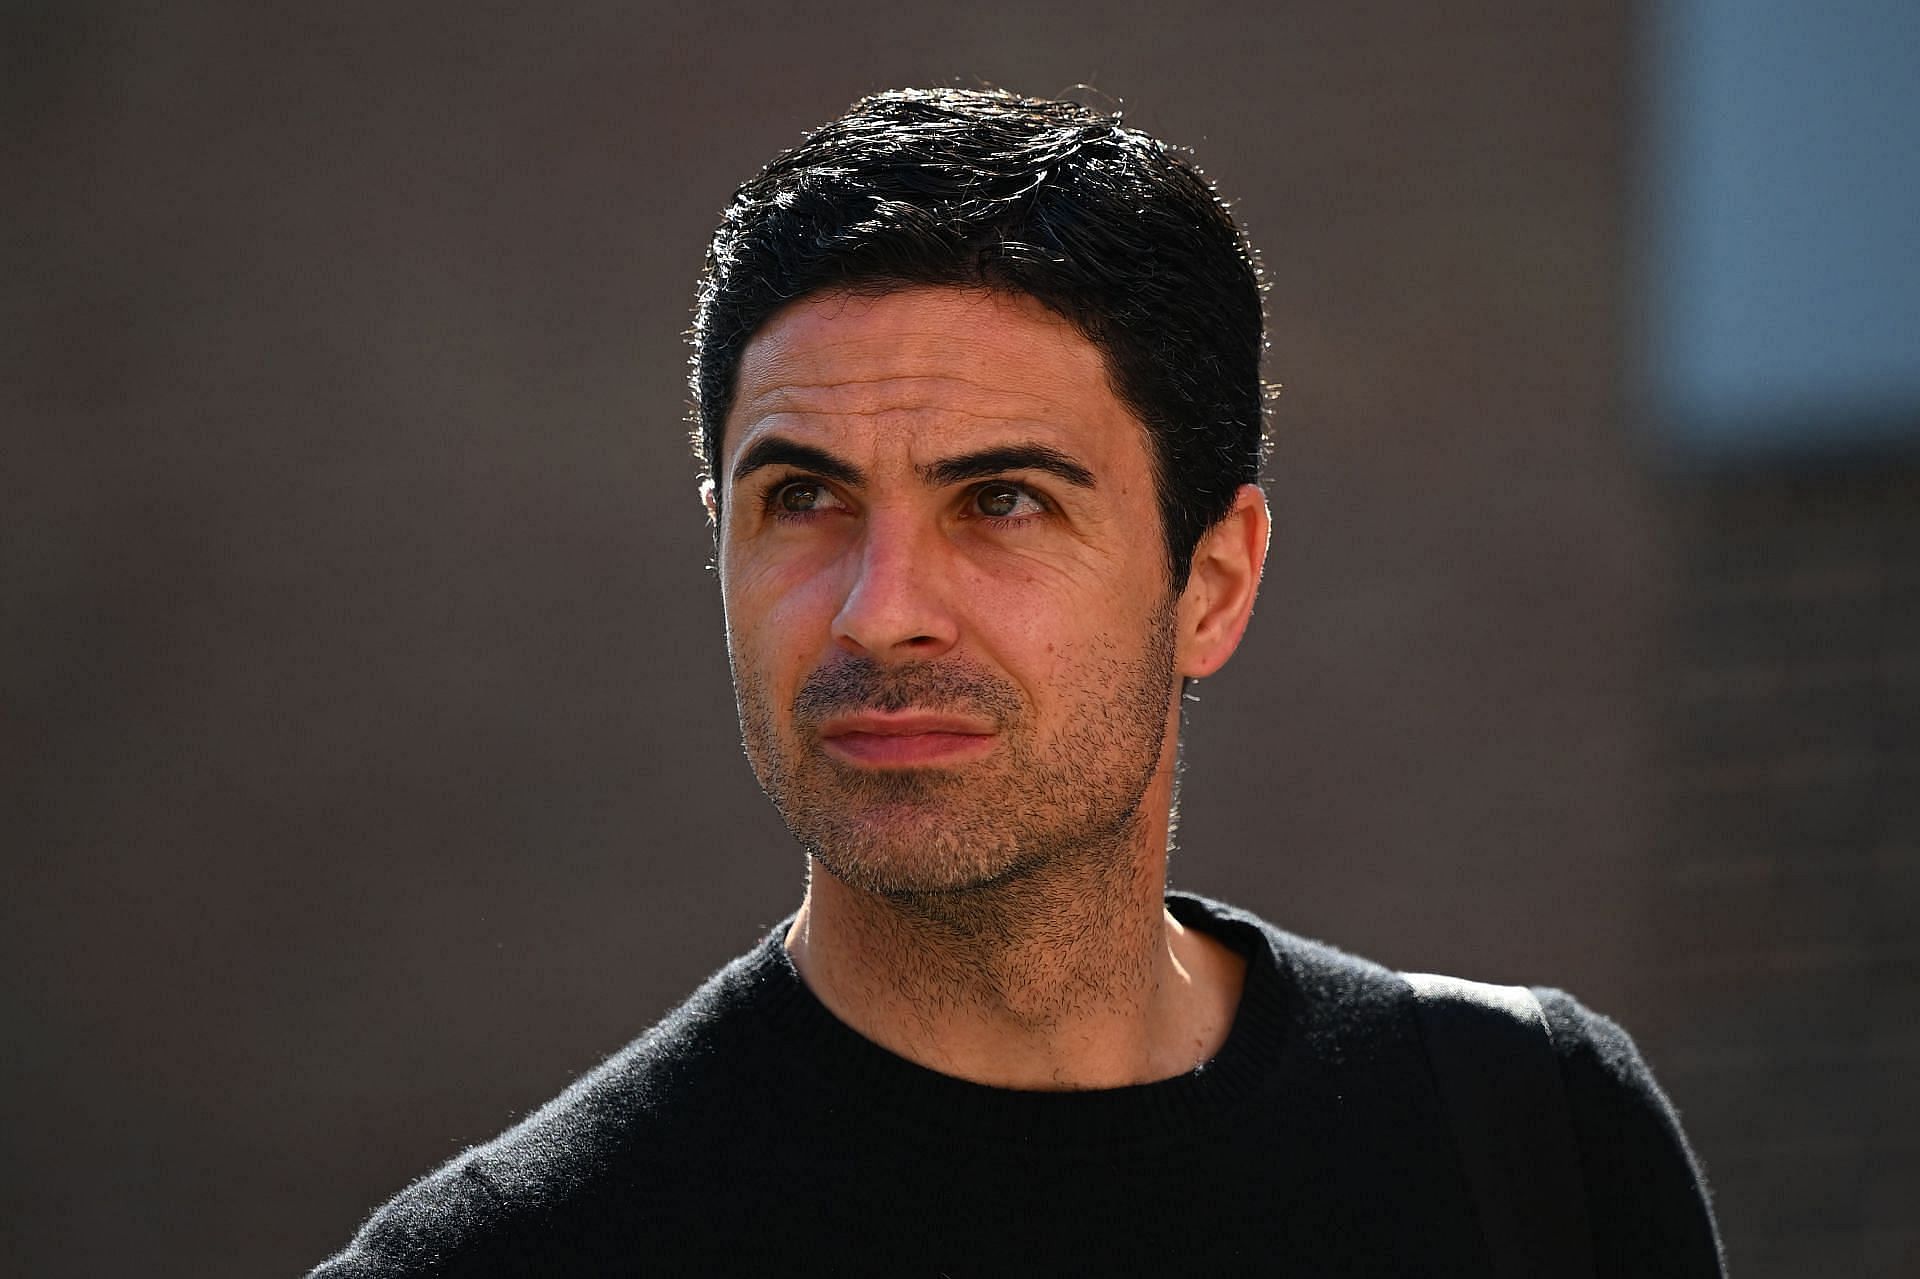 Arsenal manager Mikel Arteta is working to upgrade his squad